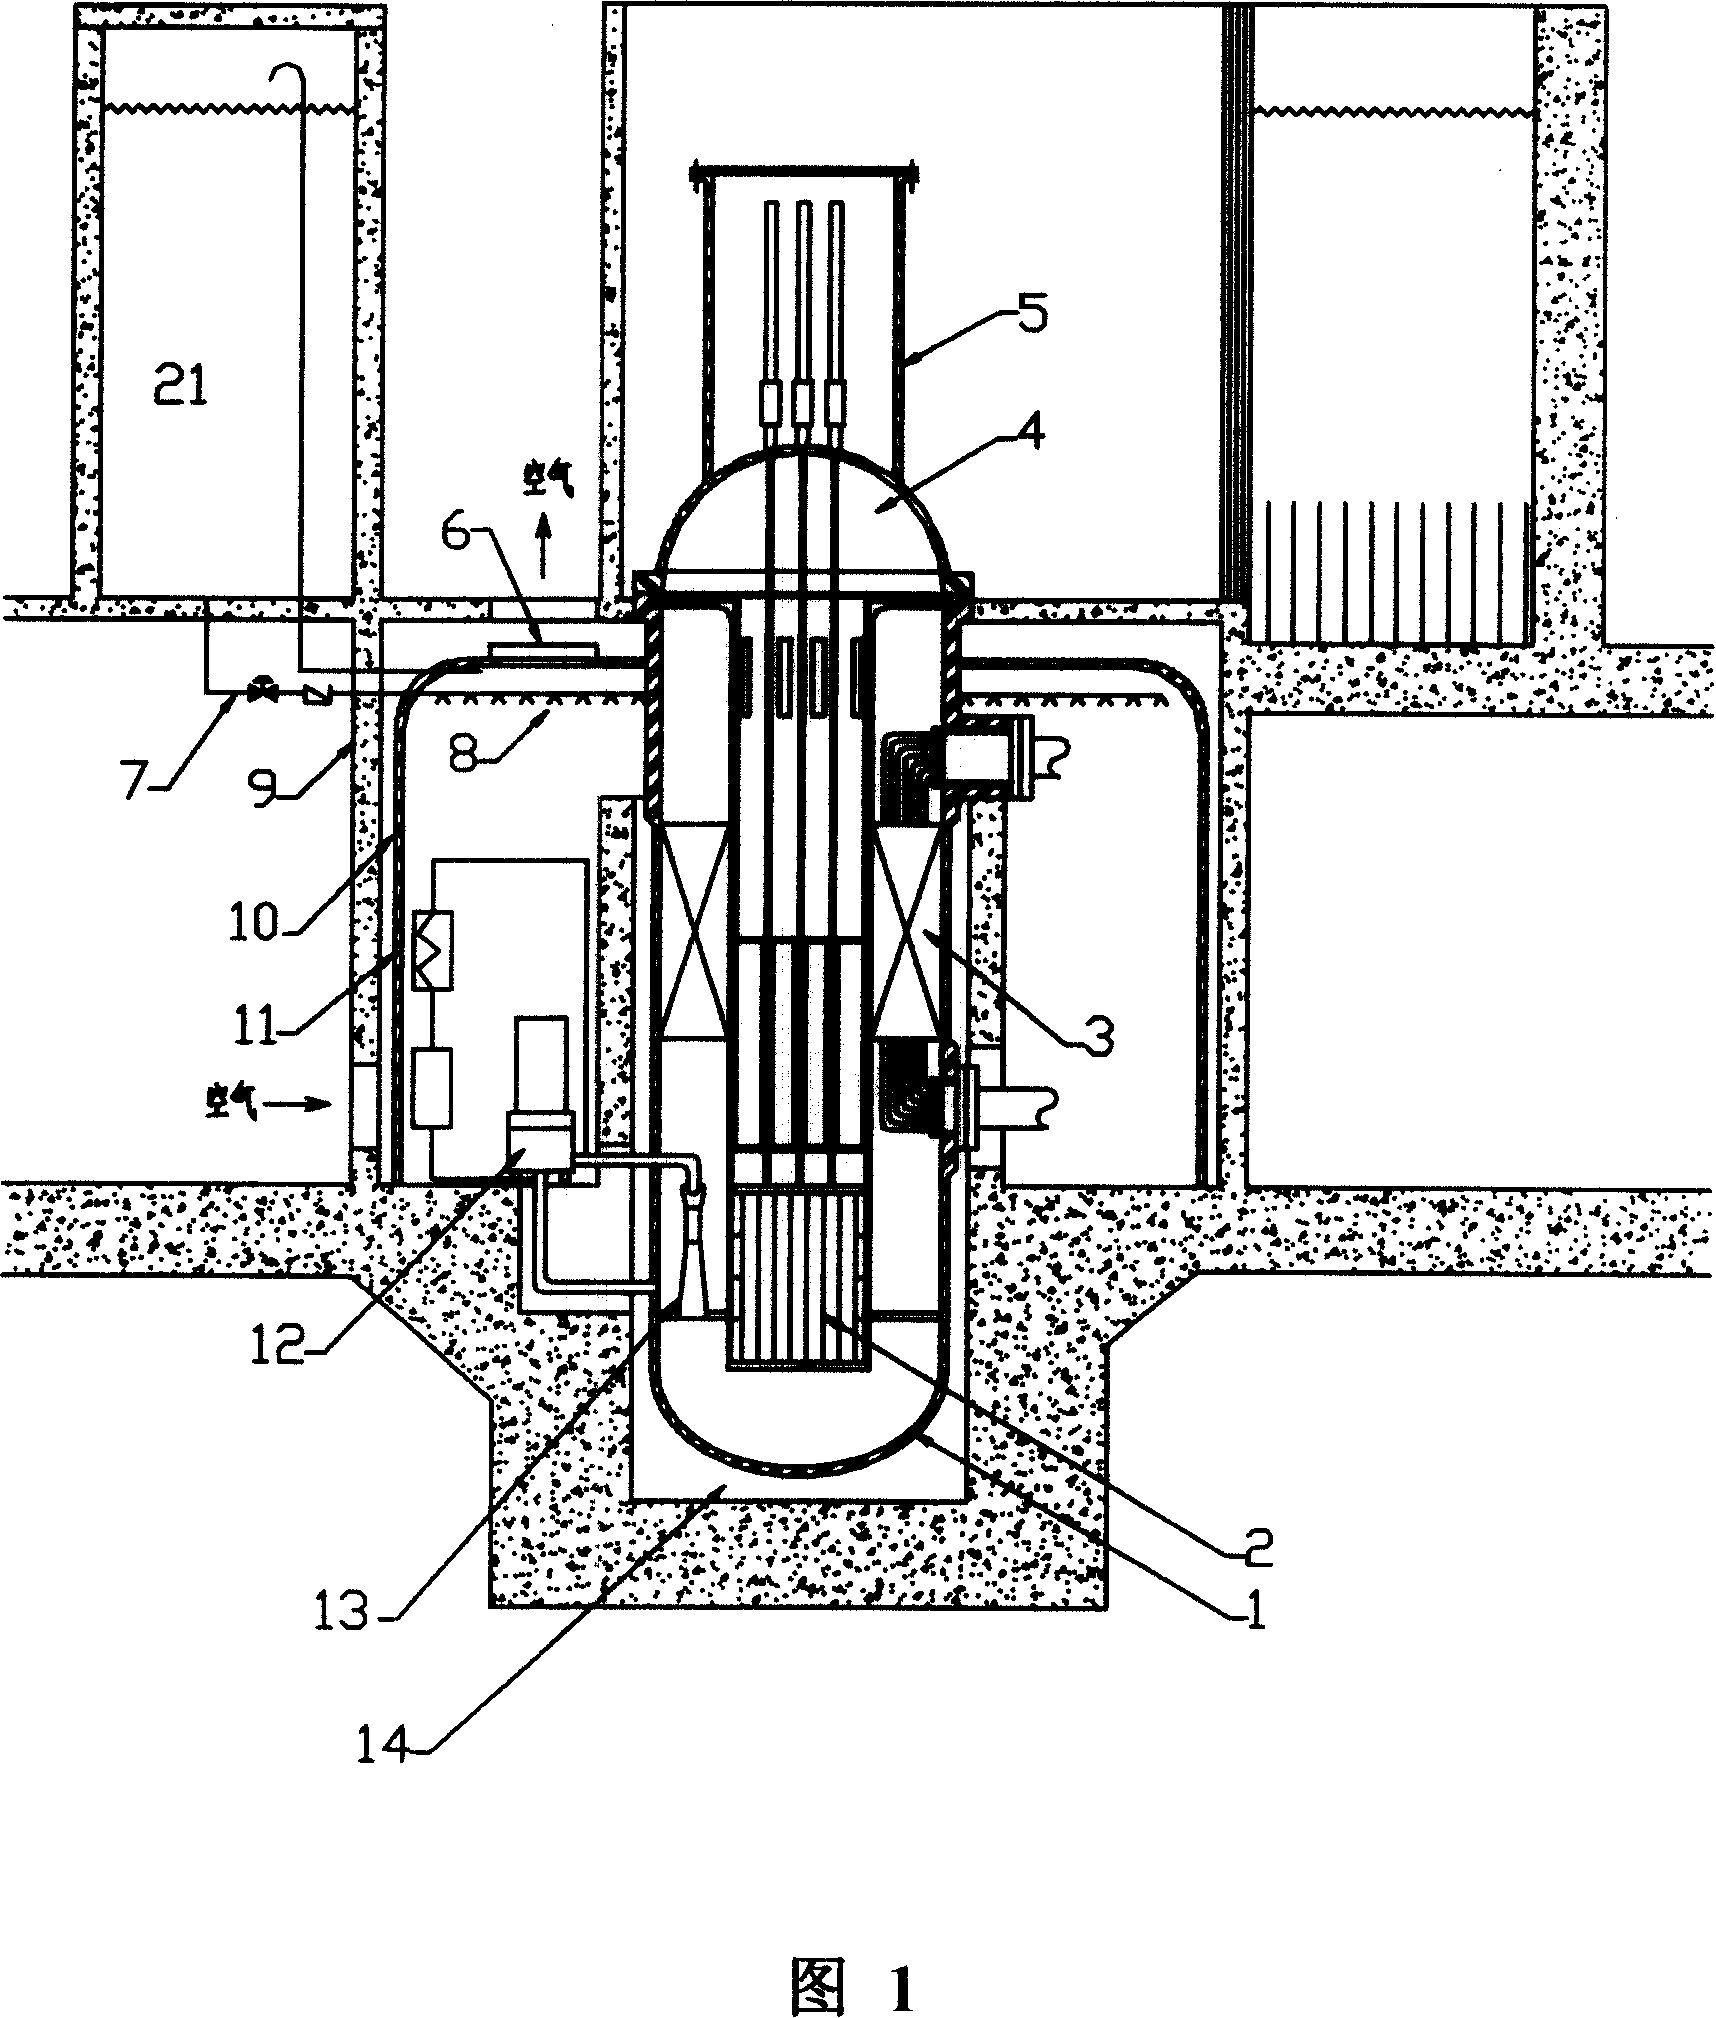 Integrated low-temperature nuclear heat supplying pile